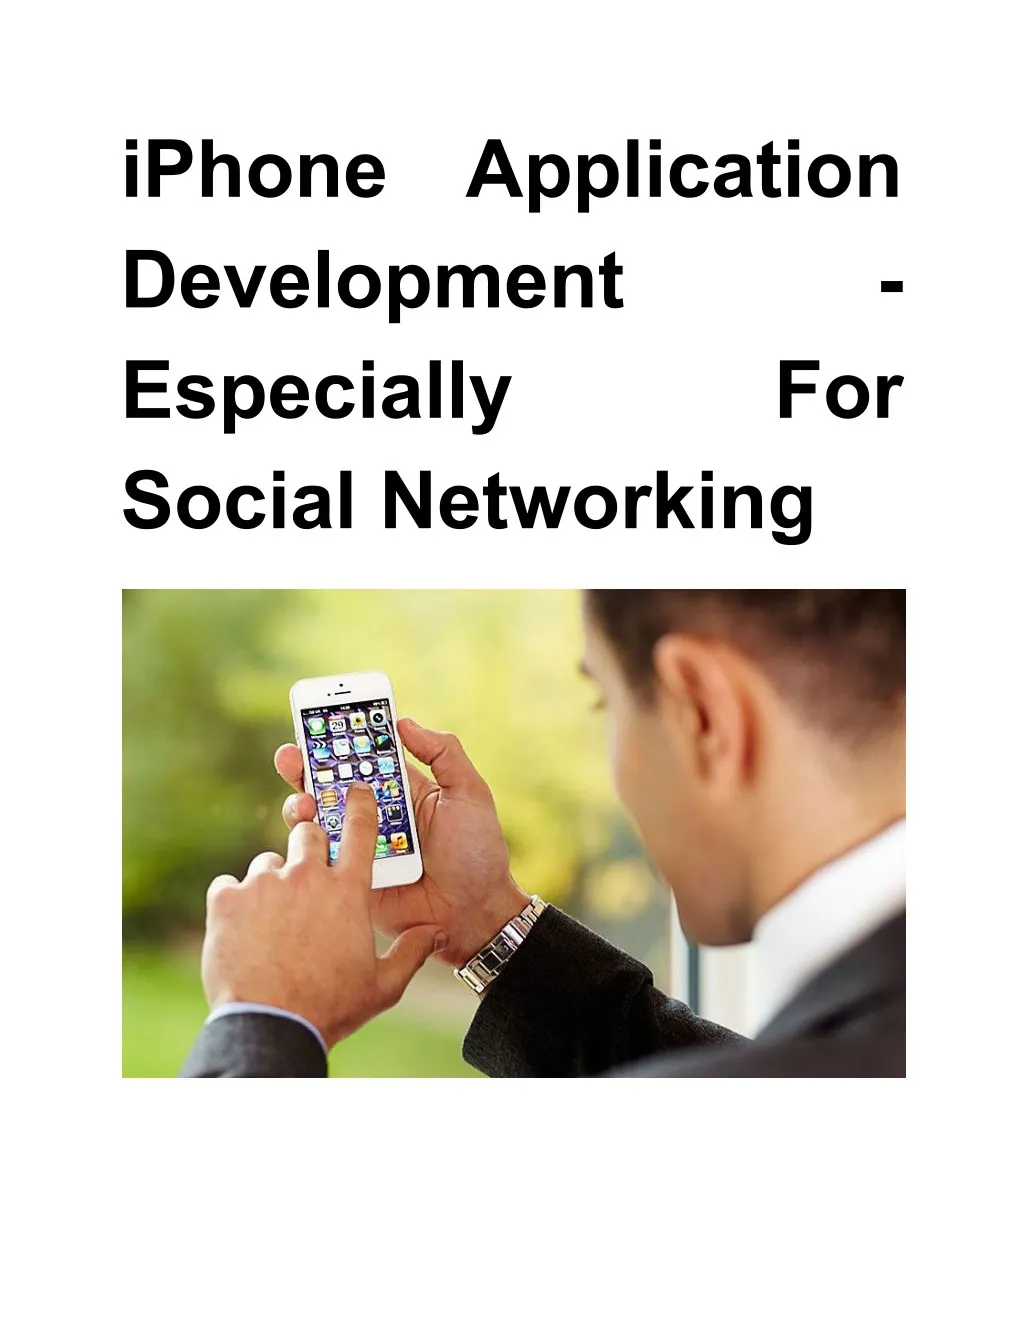 iphone development especially social networking